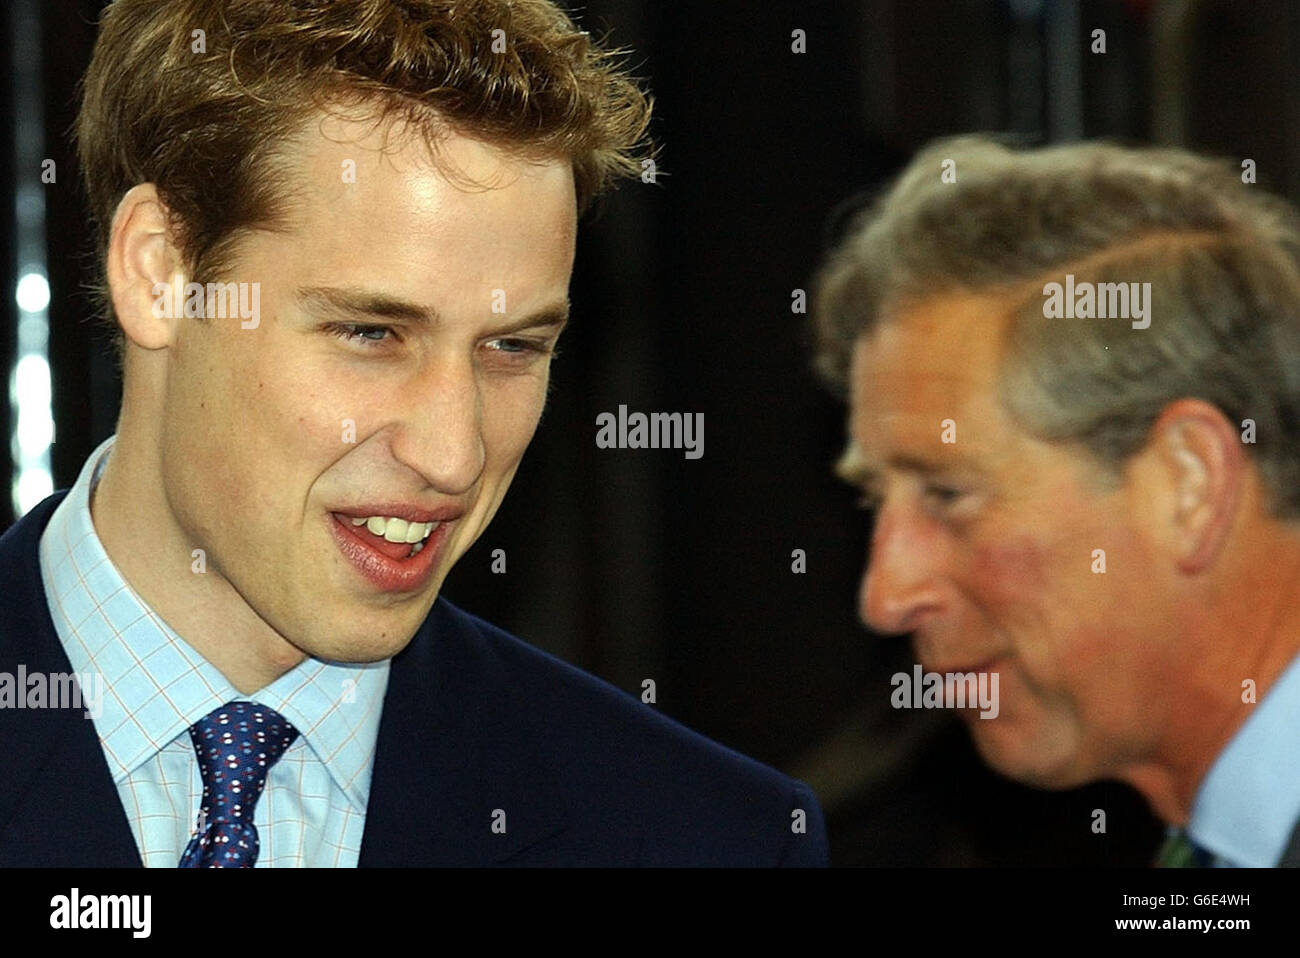 Prince William, and his father, Prince Charles, arrive at Bangor Station, for a visit to Wales in the run-up to his 21st birthday. * Two days before coming-of-age, William and his father were visiting the Anglesey Food Fair in north Wales and Newport Action for Single Homeless (NASH) in south Wales. Stock Photo